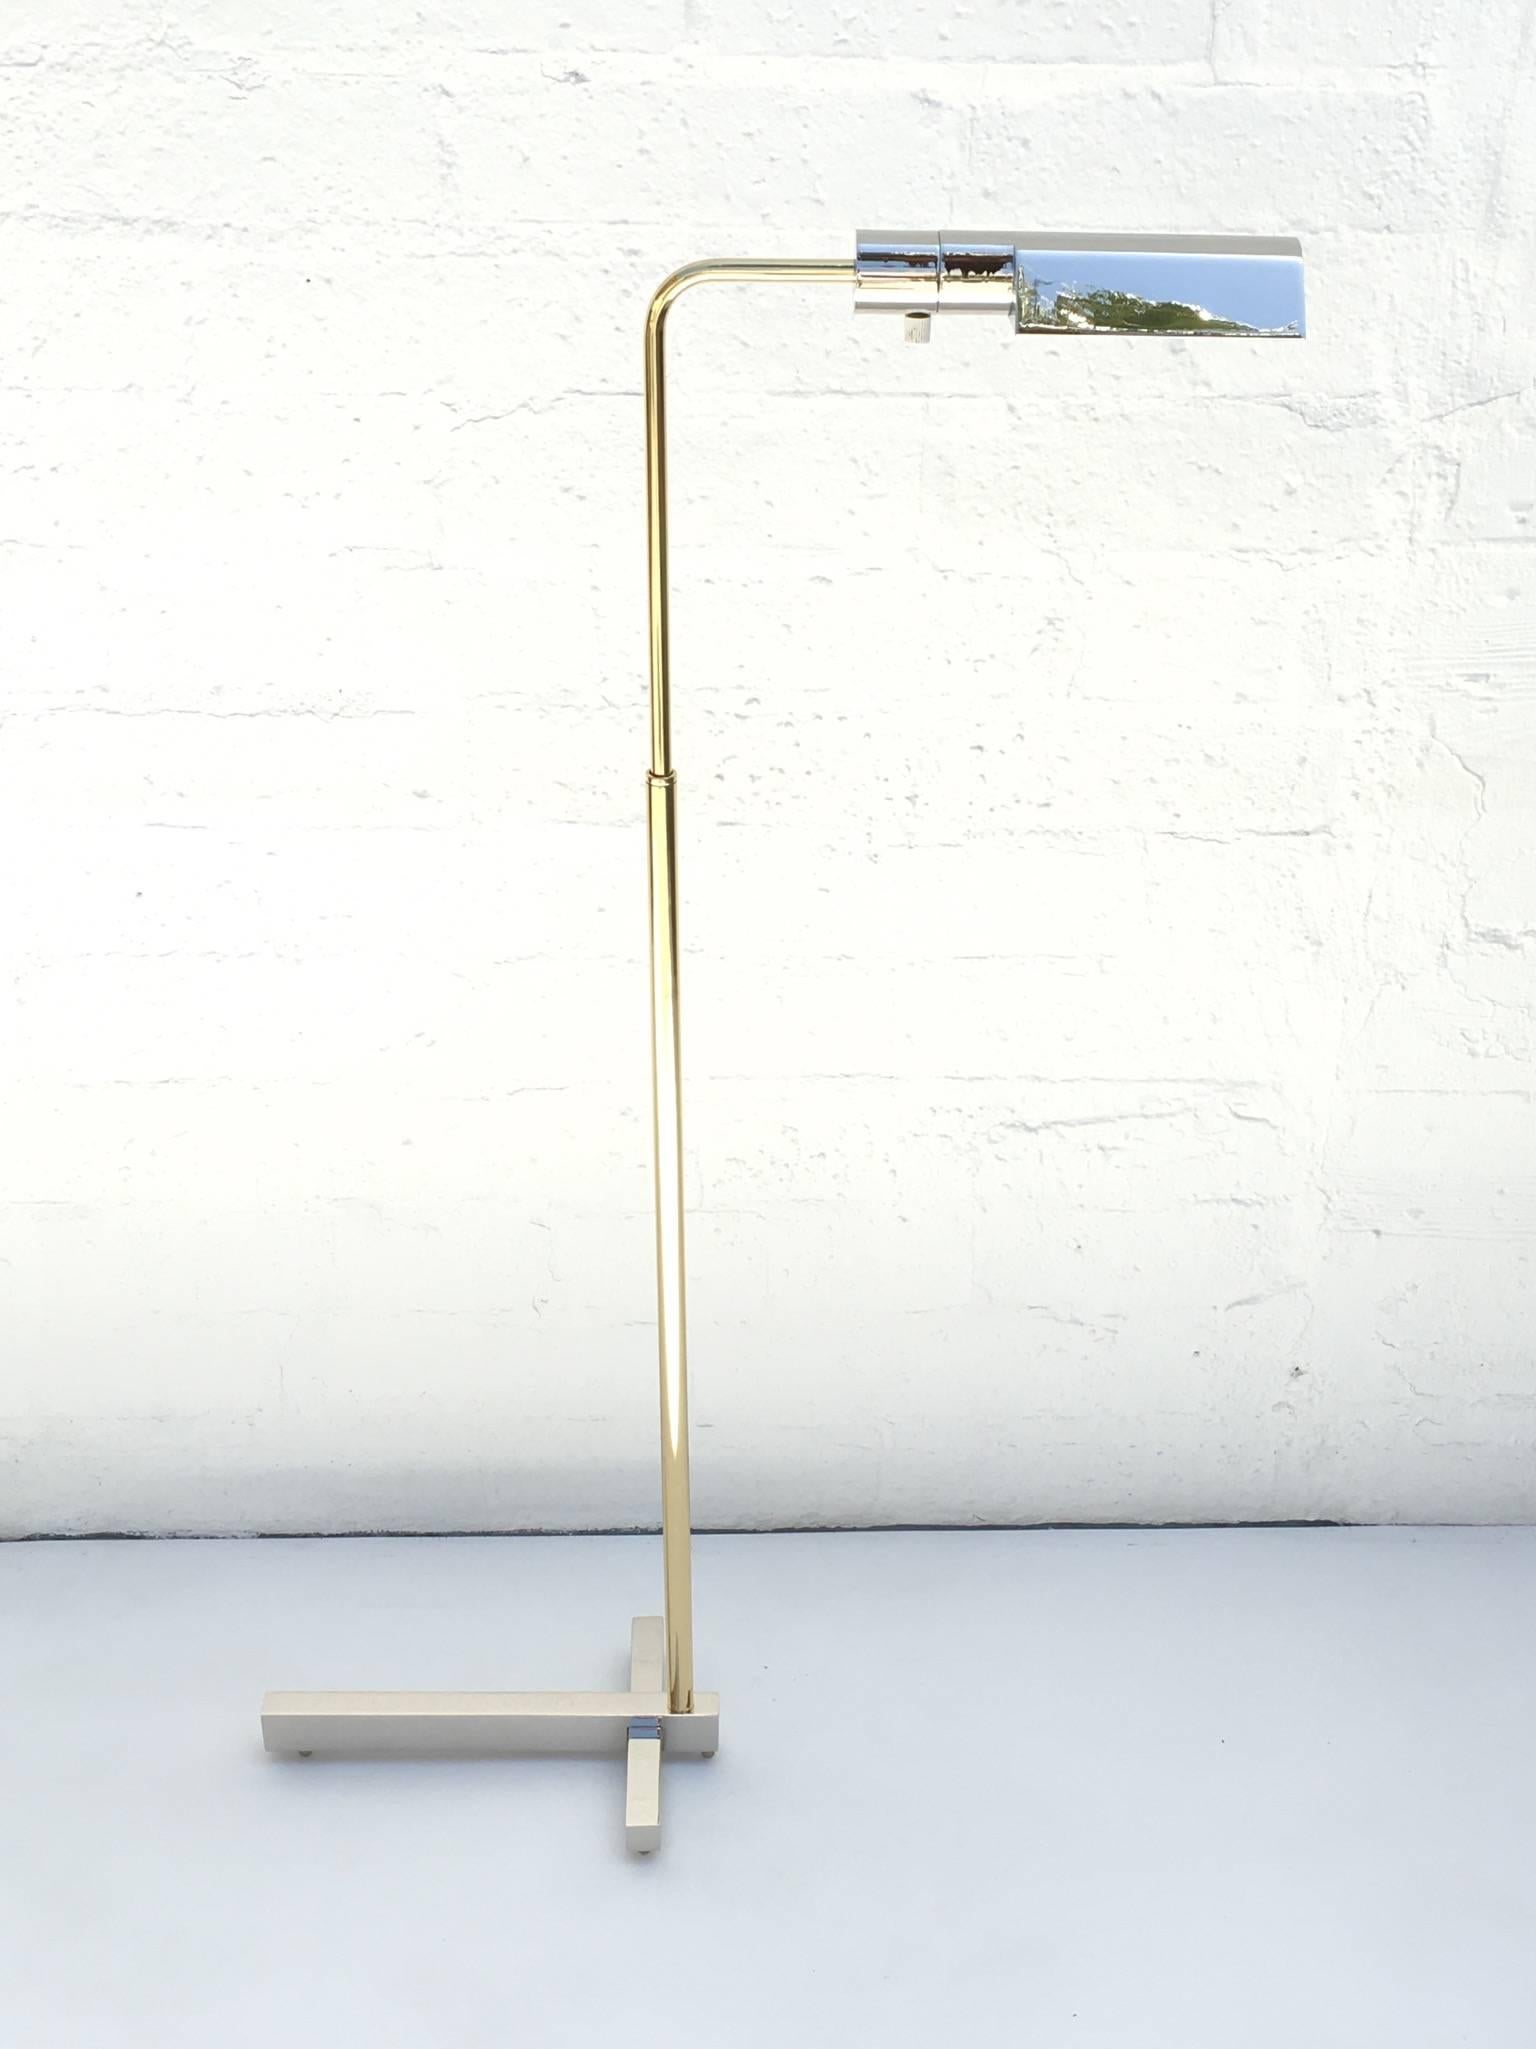 A glamorous two-tone T-base floor lamp by Casella.
Adjustable from 32